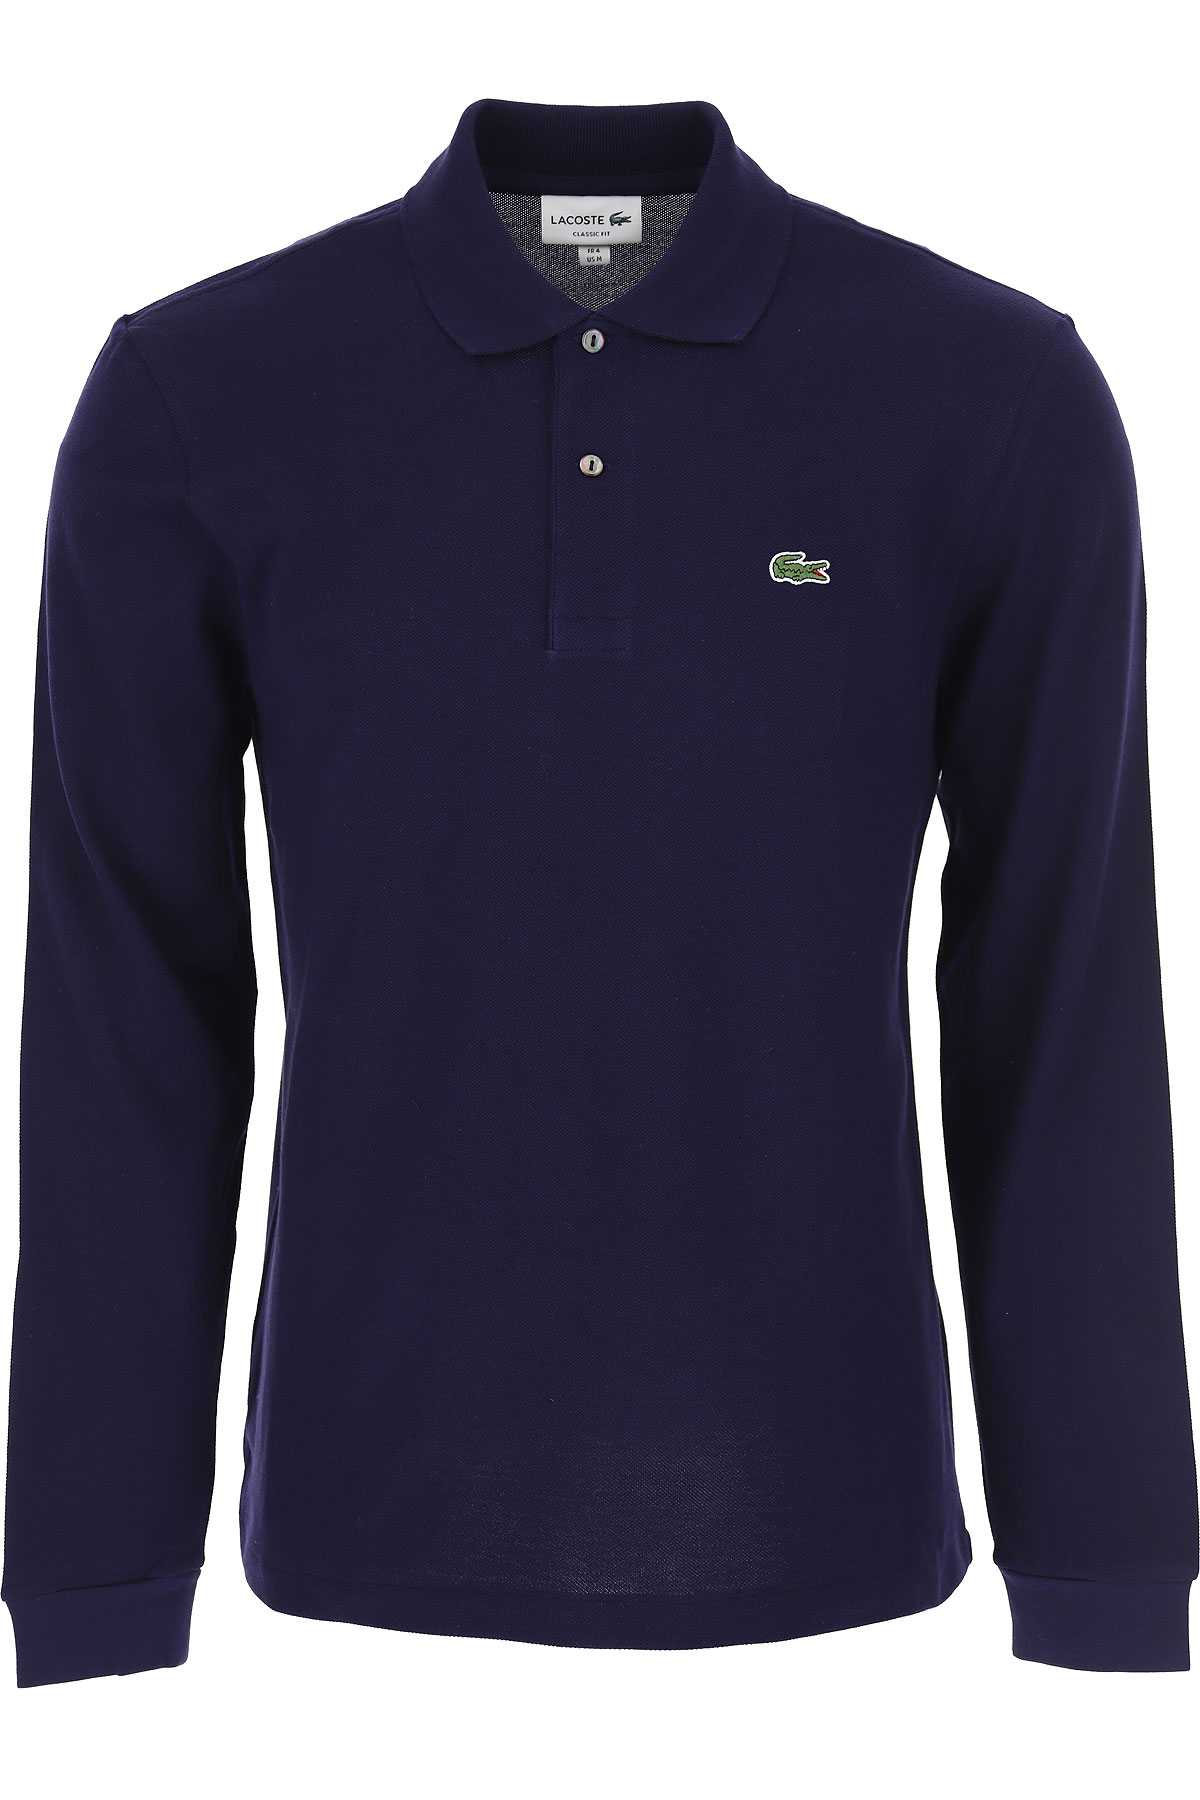 Mens Clothing Lacoste, Style code: 1312-166-